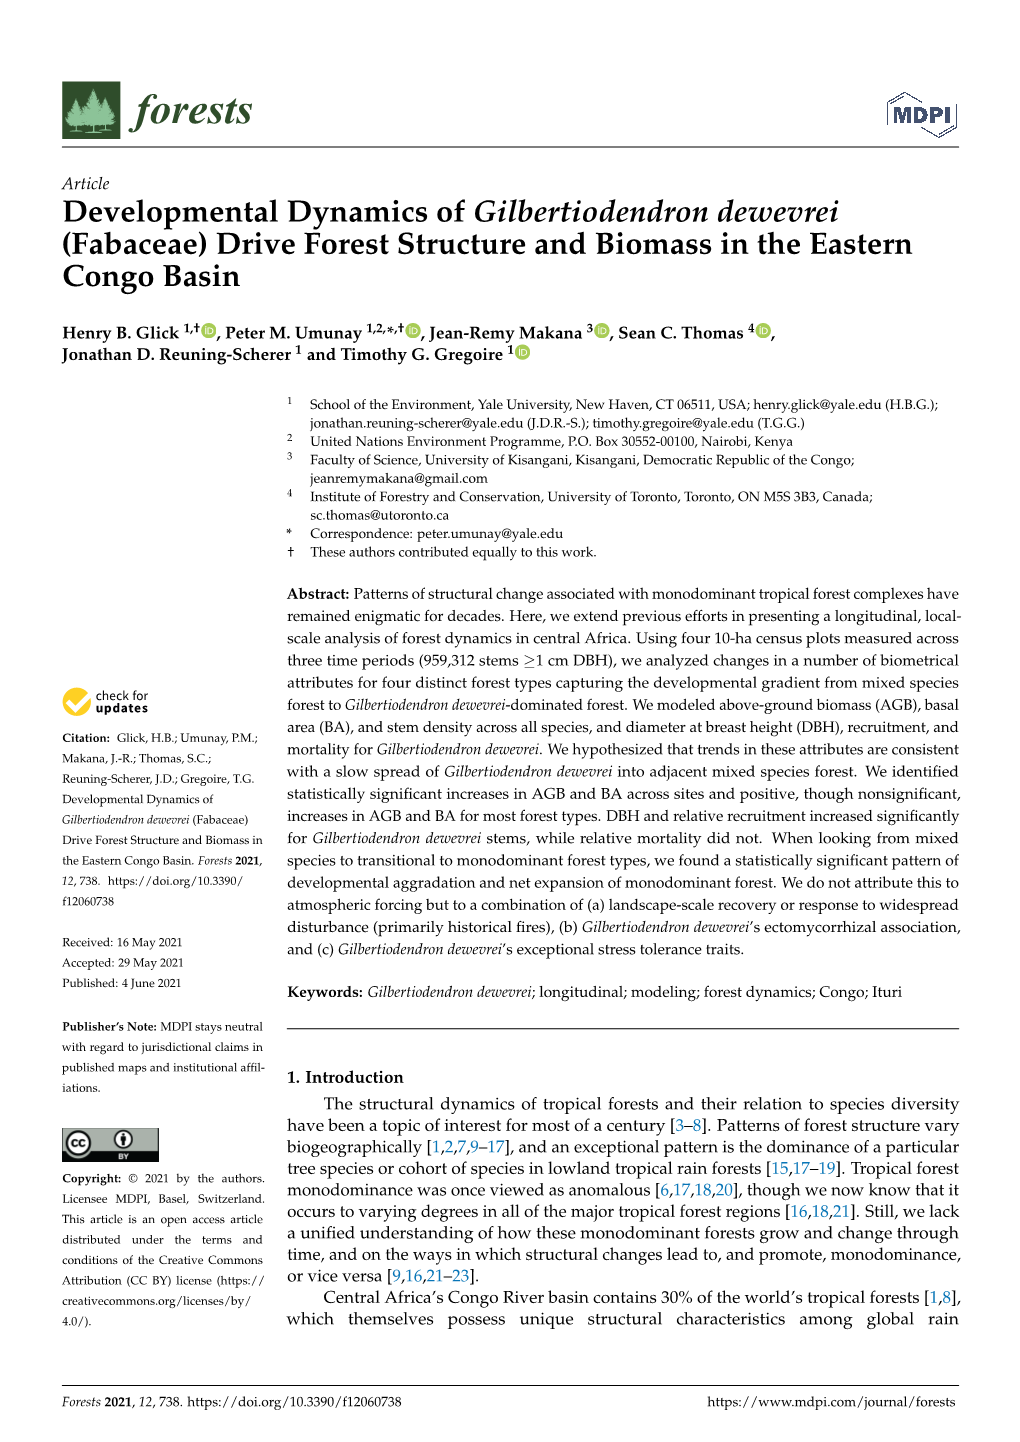 Developmental Dynamics of Gilbertiodendron Dewevrei (Fabaceae) Drive Forest Structure and Biomass in the Eastern Congo Basin